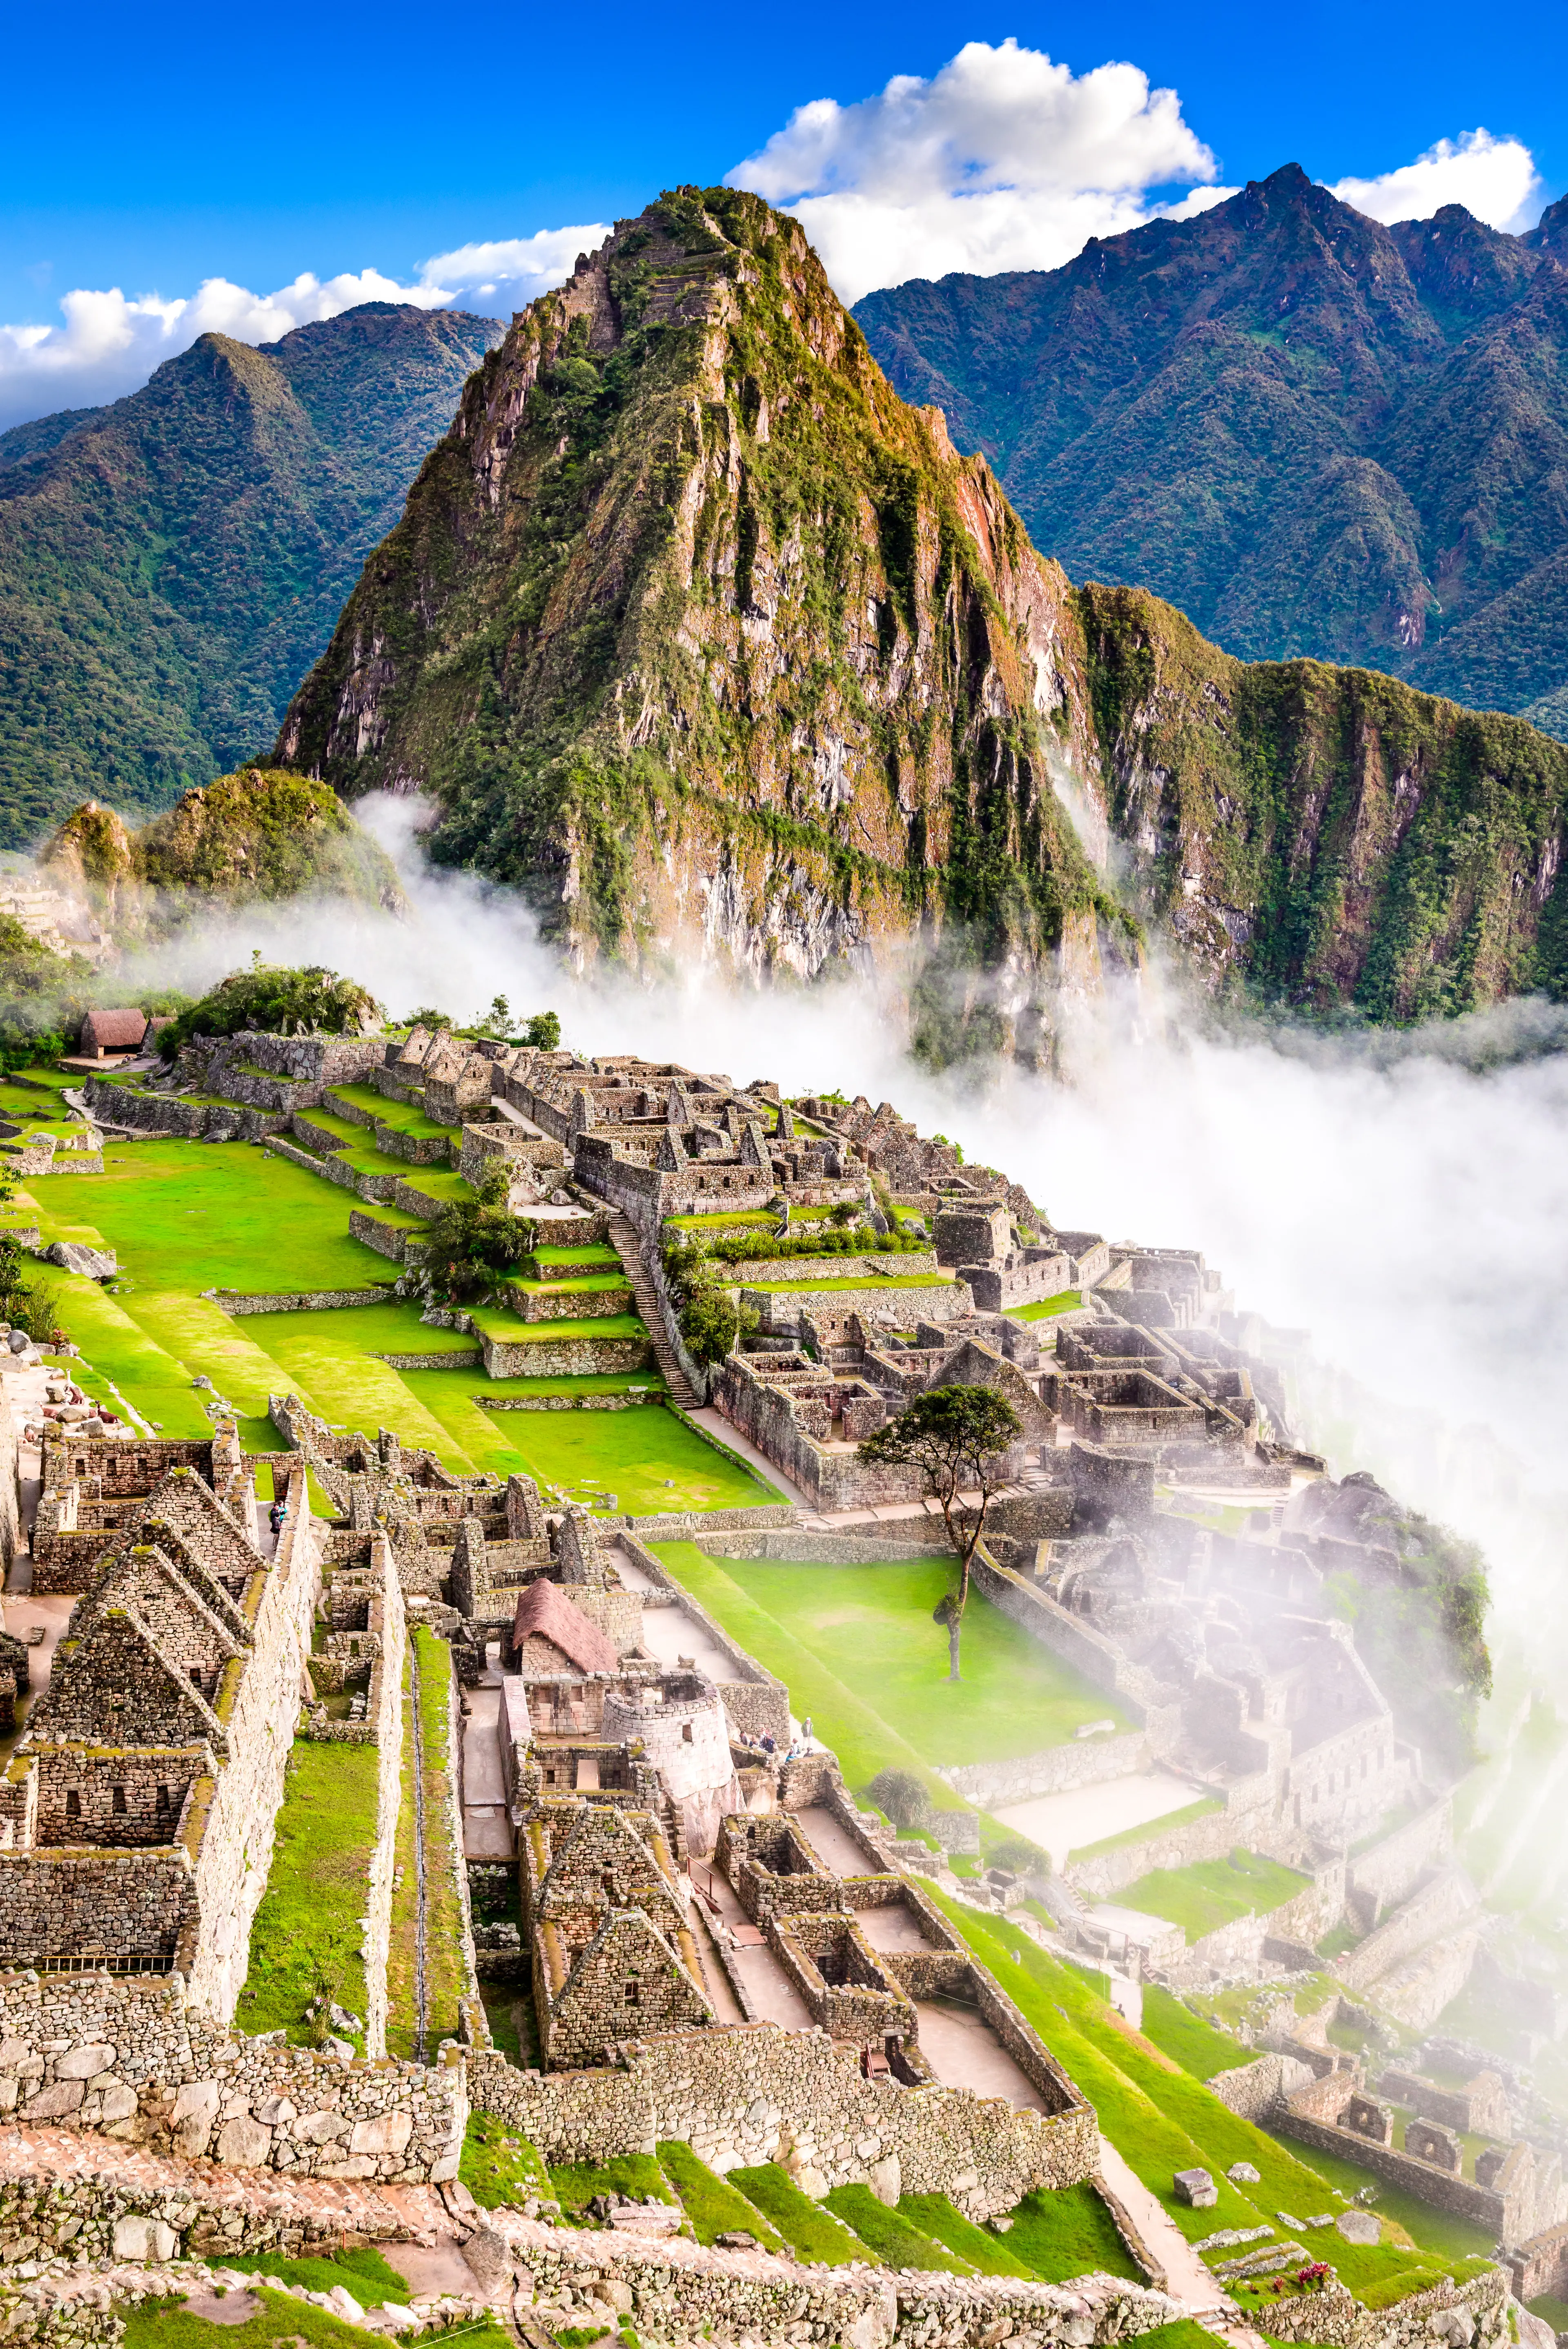 2-Day Relaxing Couple's Getaway to Machu Picchu: Sightseeing & Food